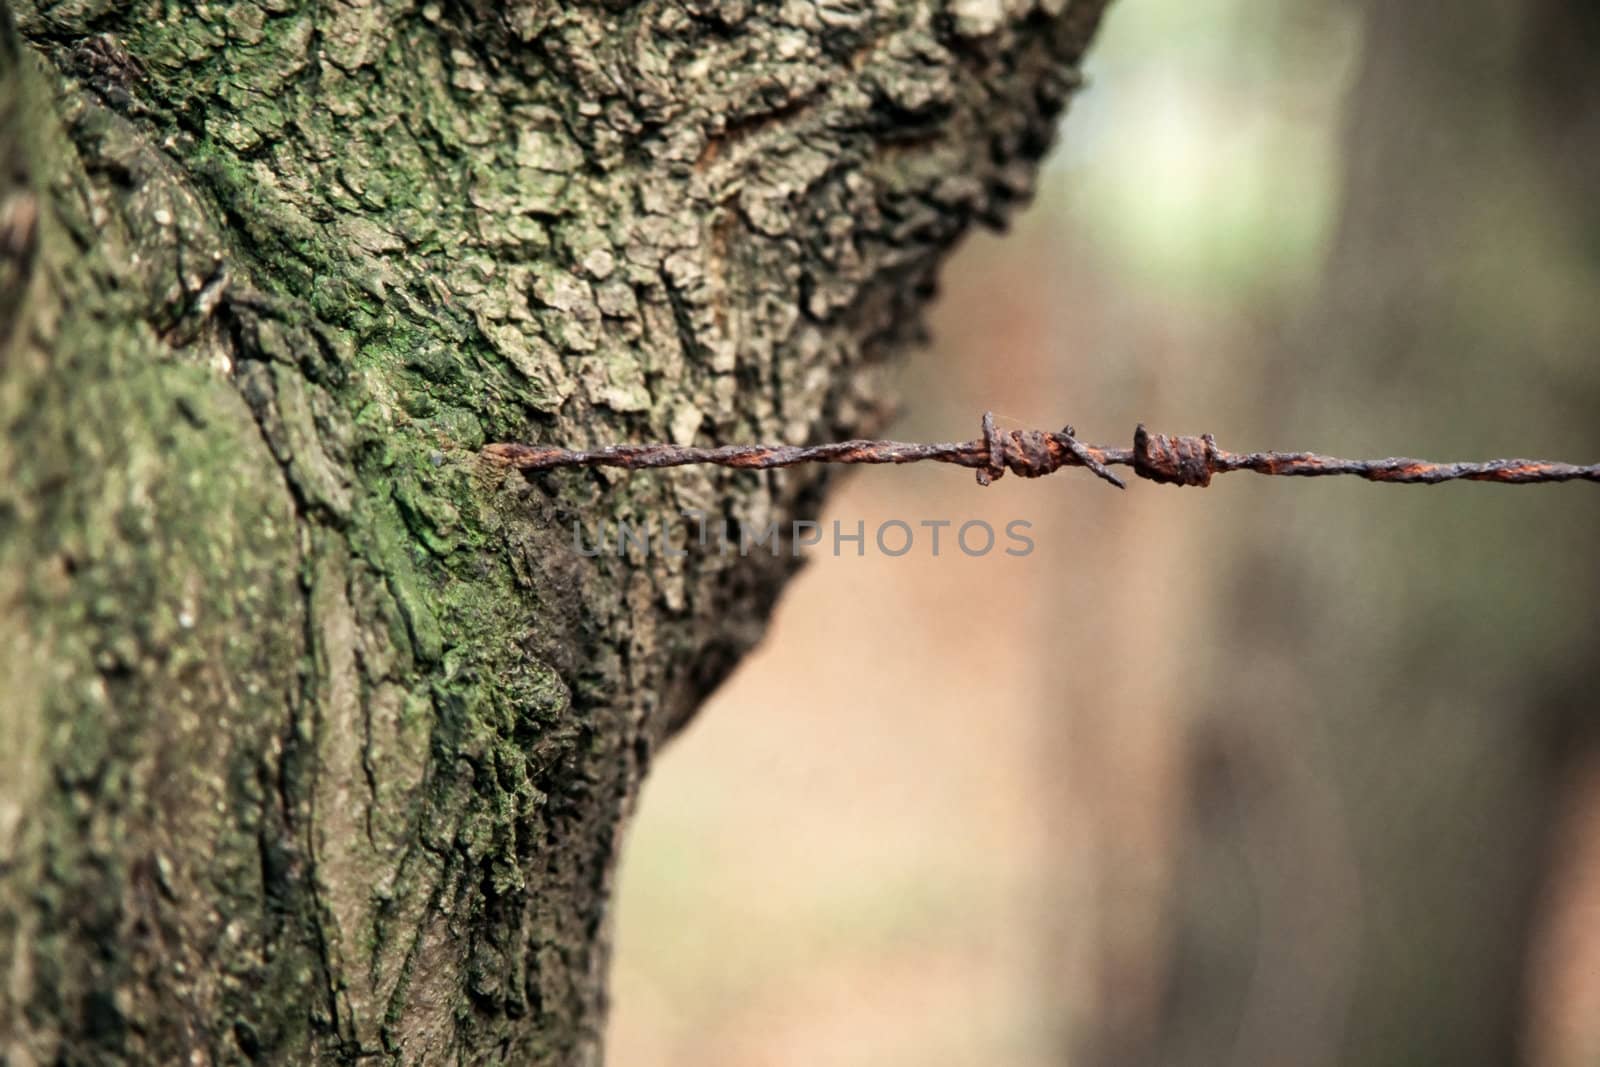 Old rusty barbed wire ingrown in tree trunk.